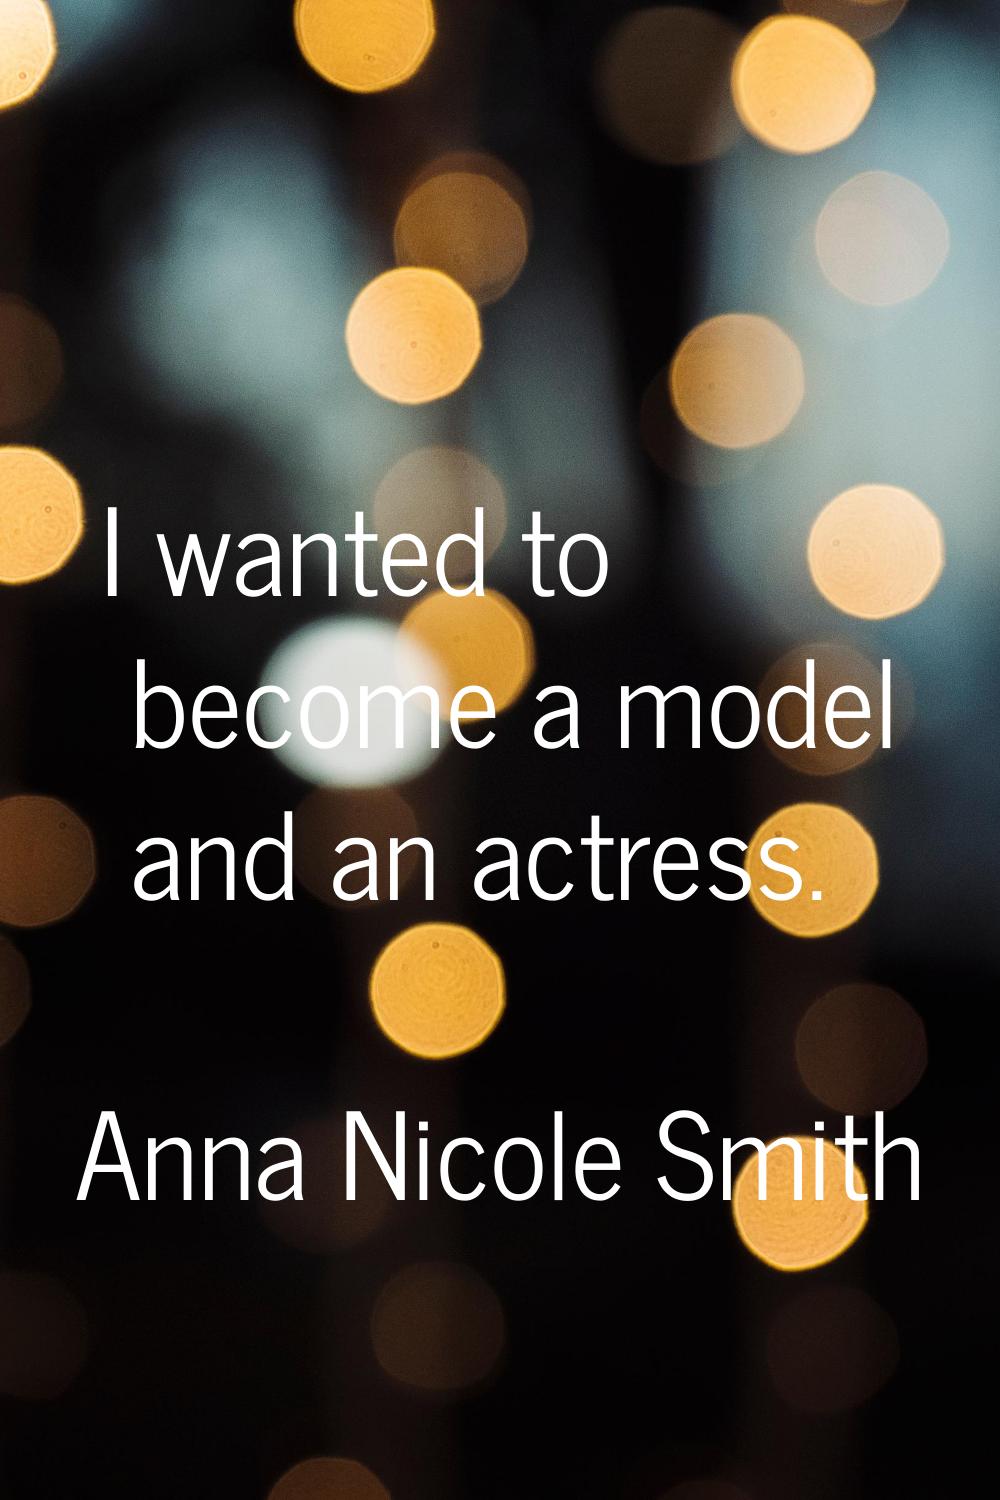 I wanted to become a model and an actress.